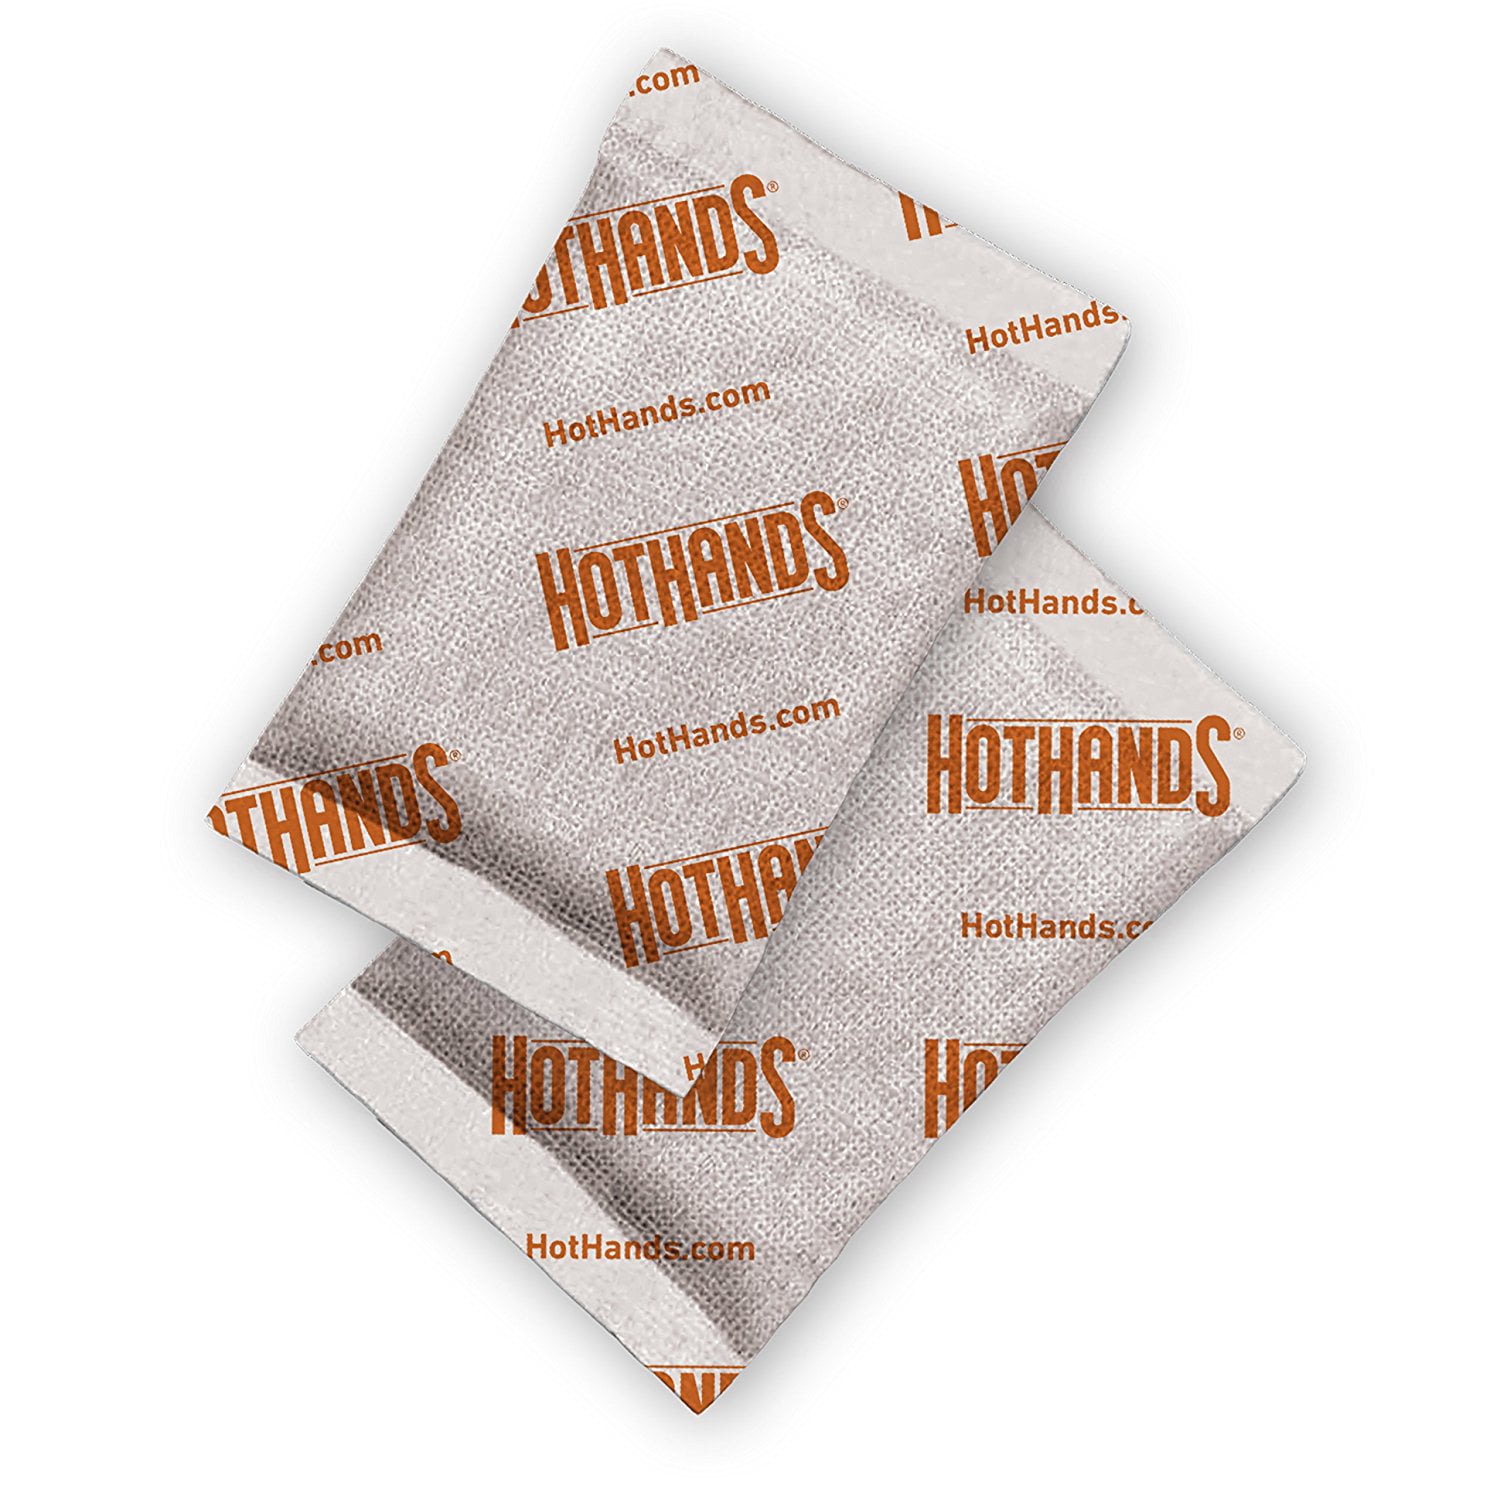 Up Details about   HotHands Body & Hand Super Warmers Long Lasting Safe Natural Odorless Air 